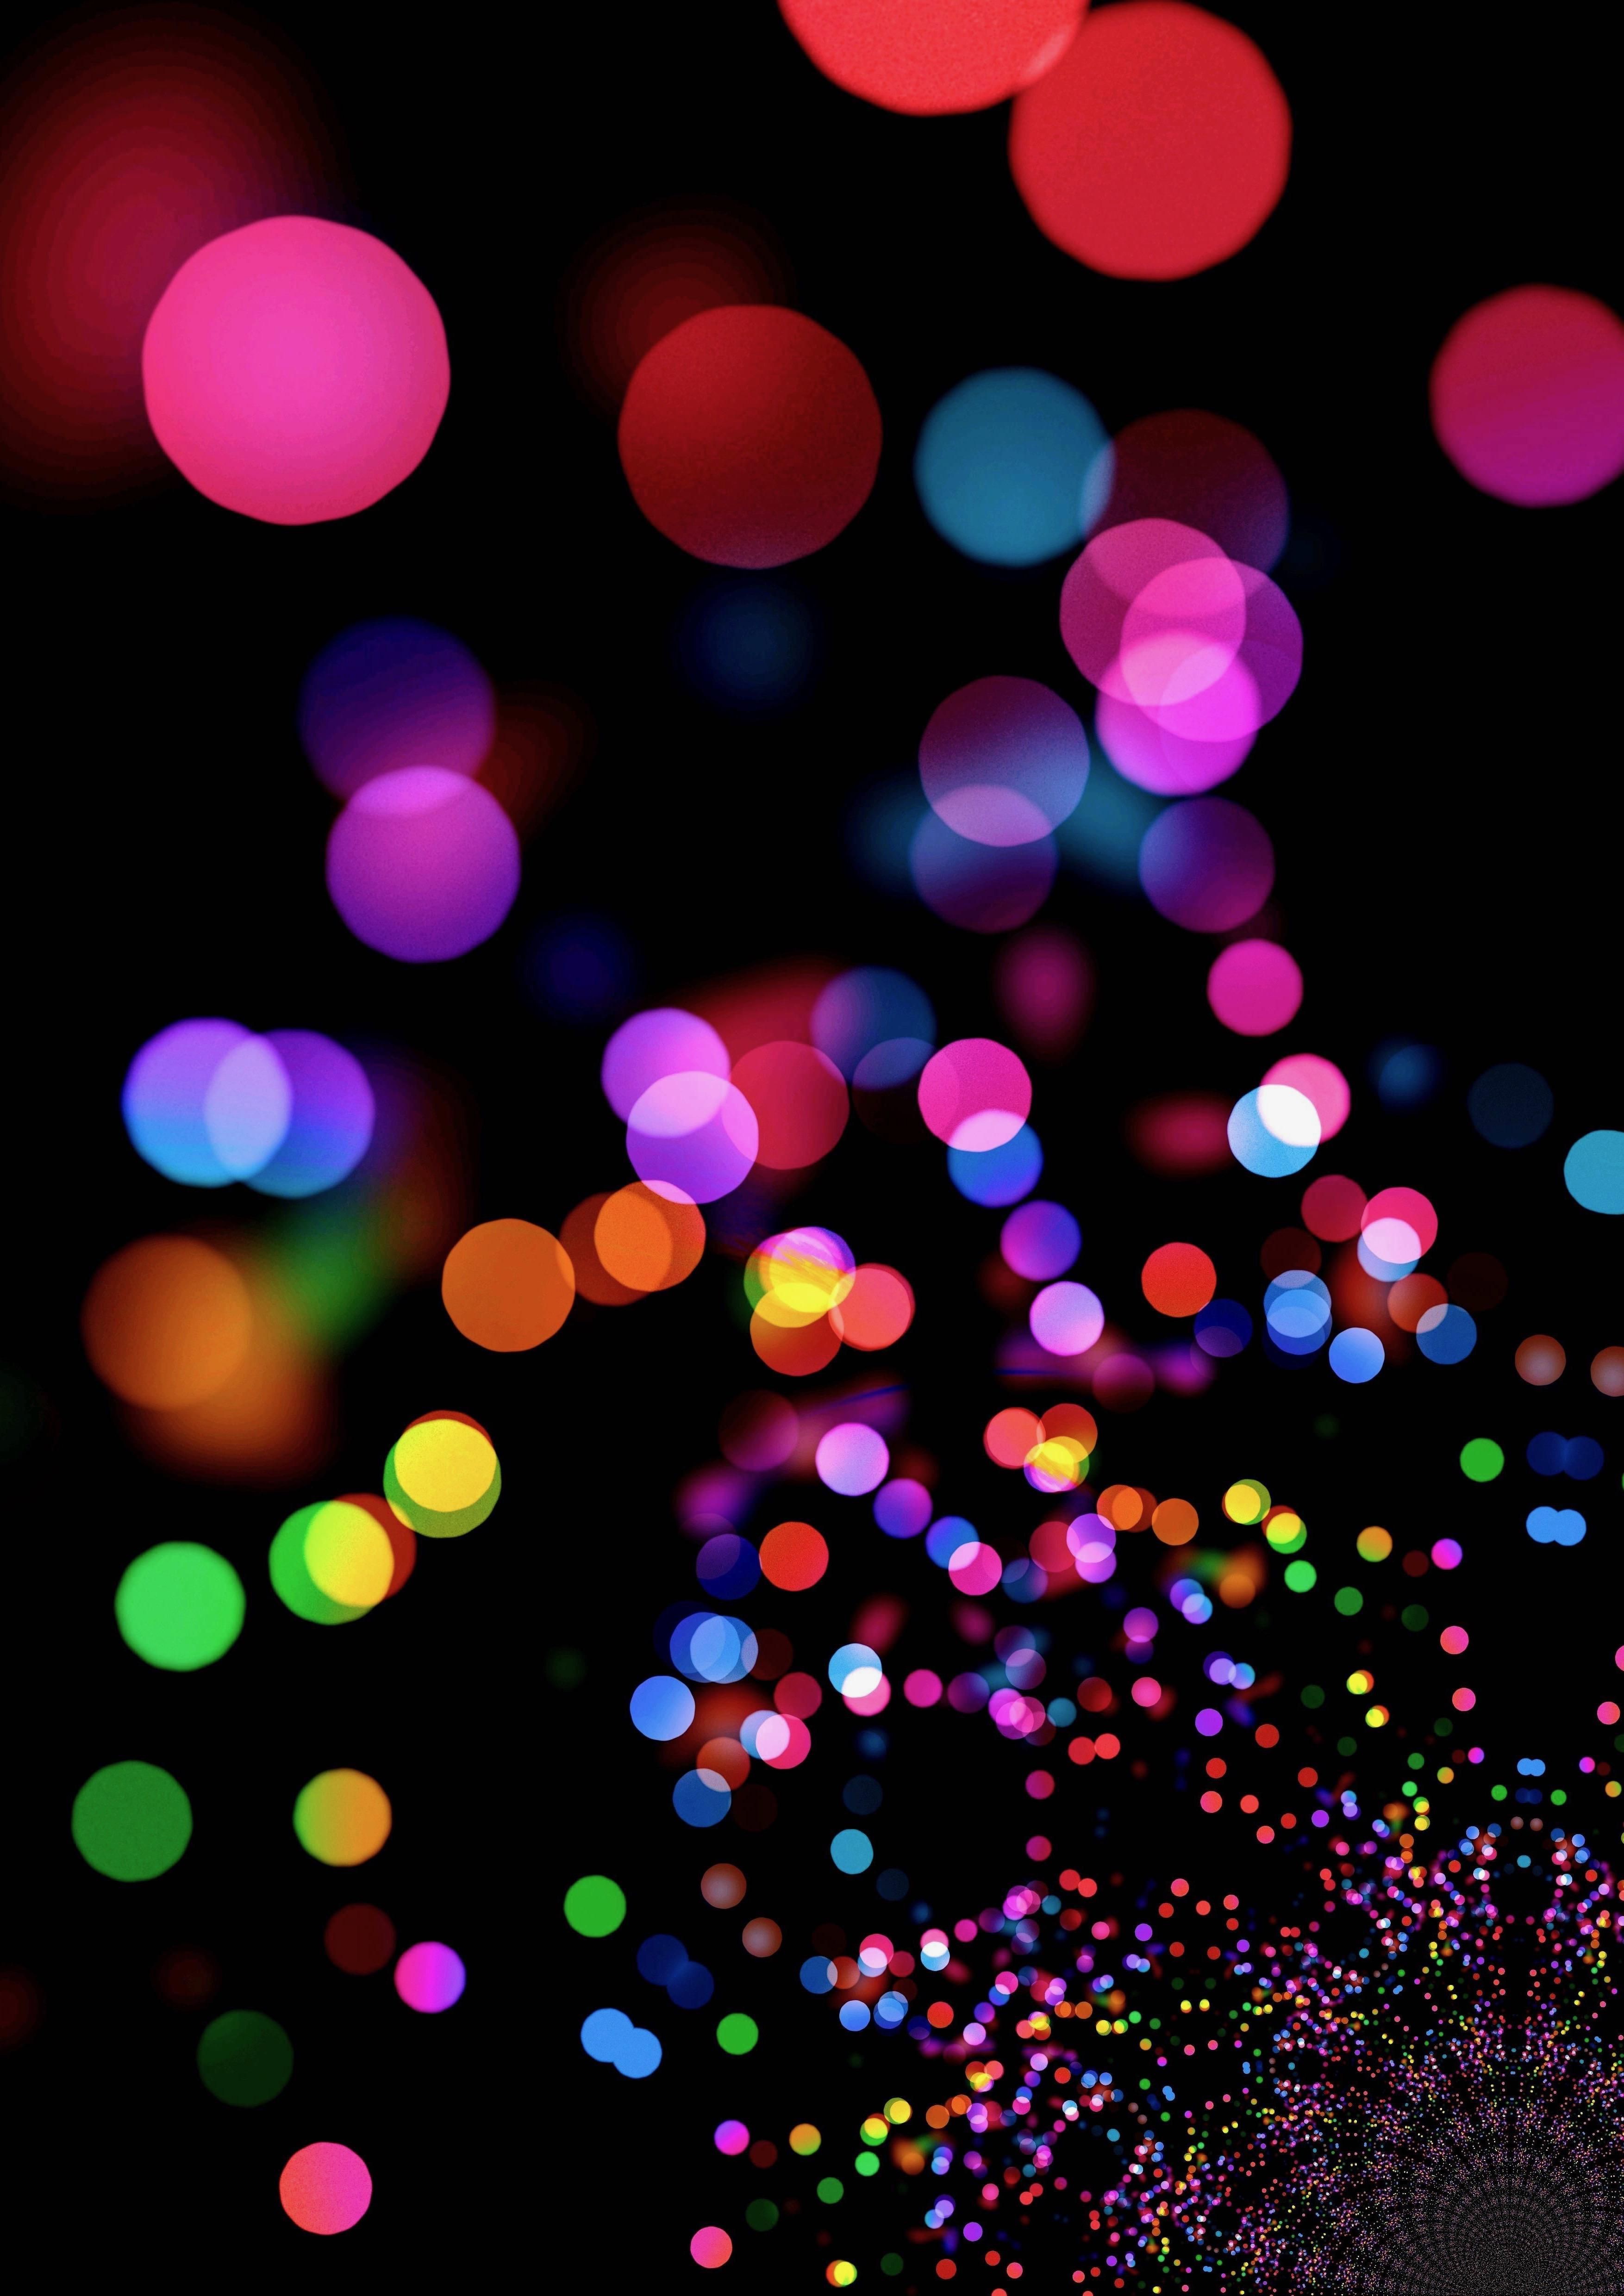 Bokeh Wallpaper That I Thought Would Look Good On The iPhone X